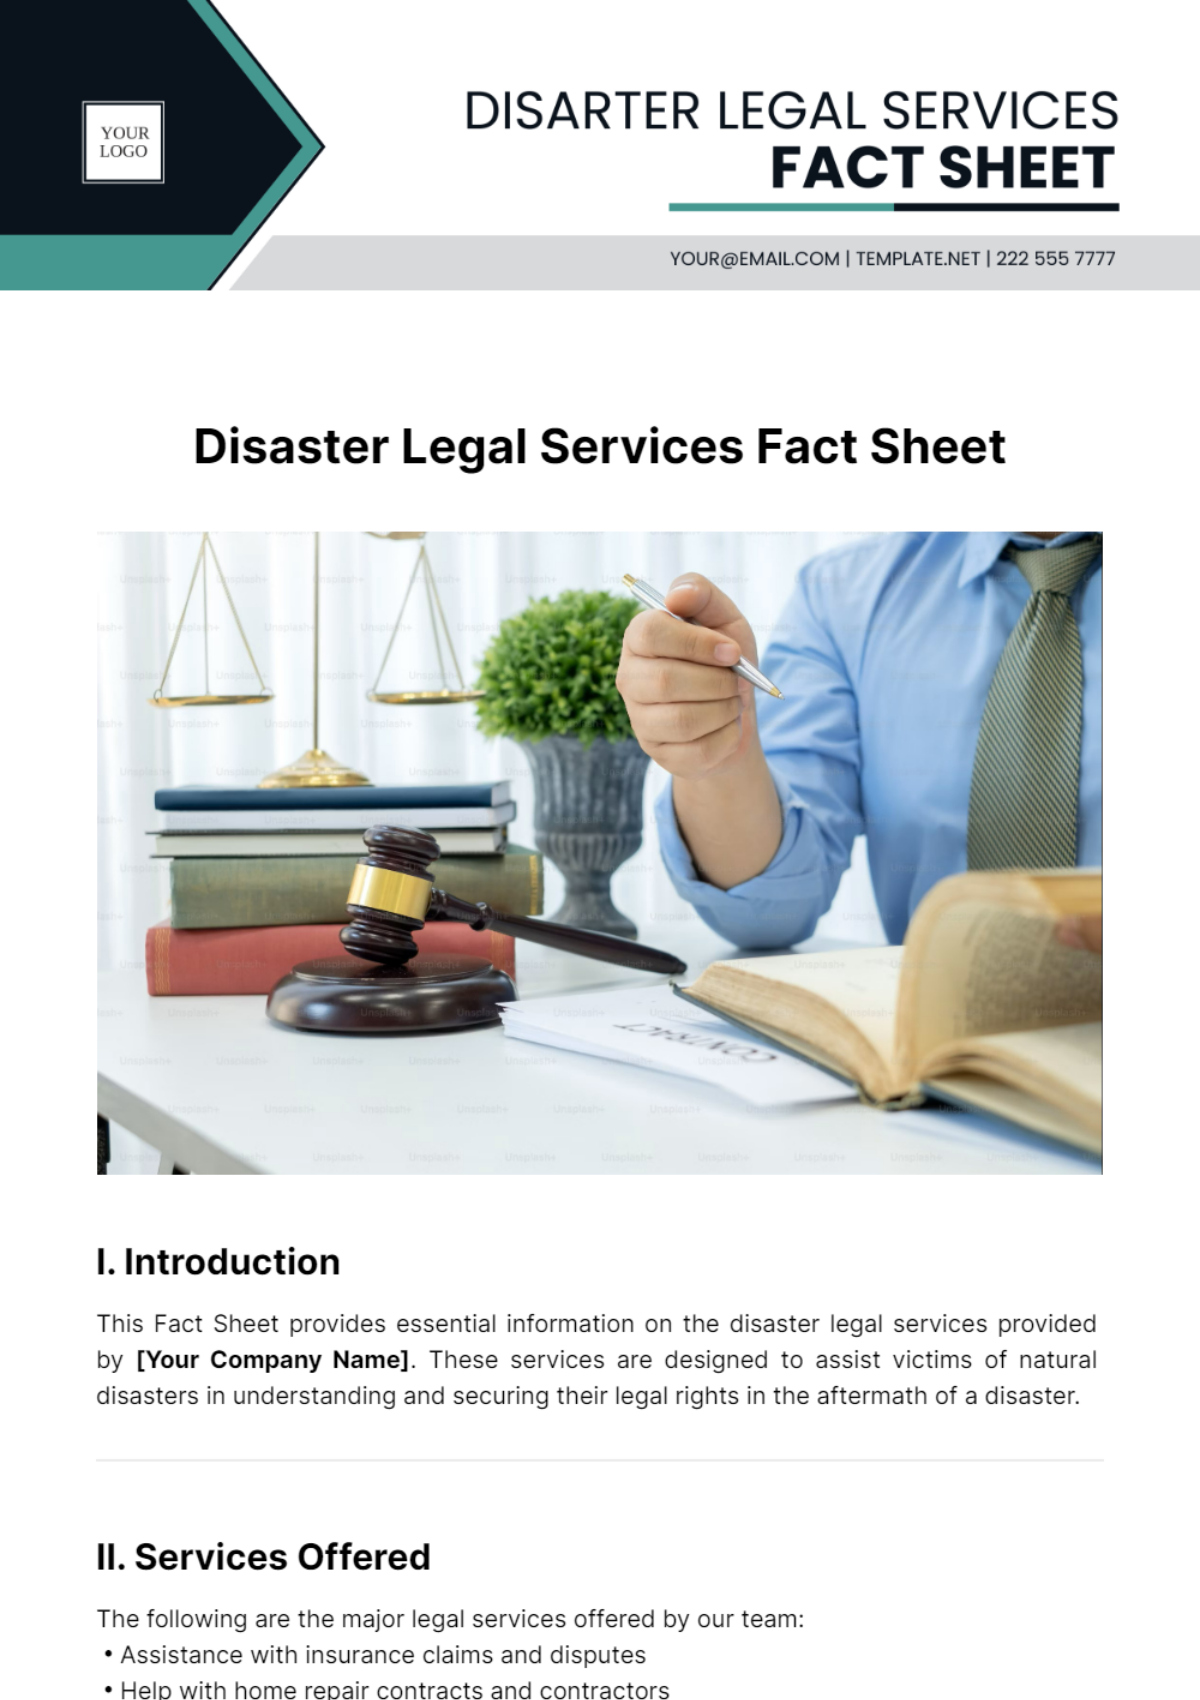 Disaster Legal Services Fact Sheet Template